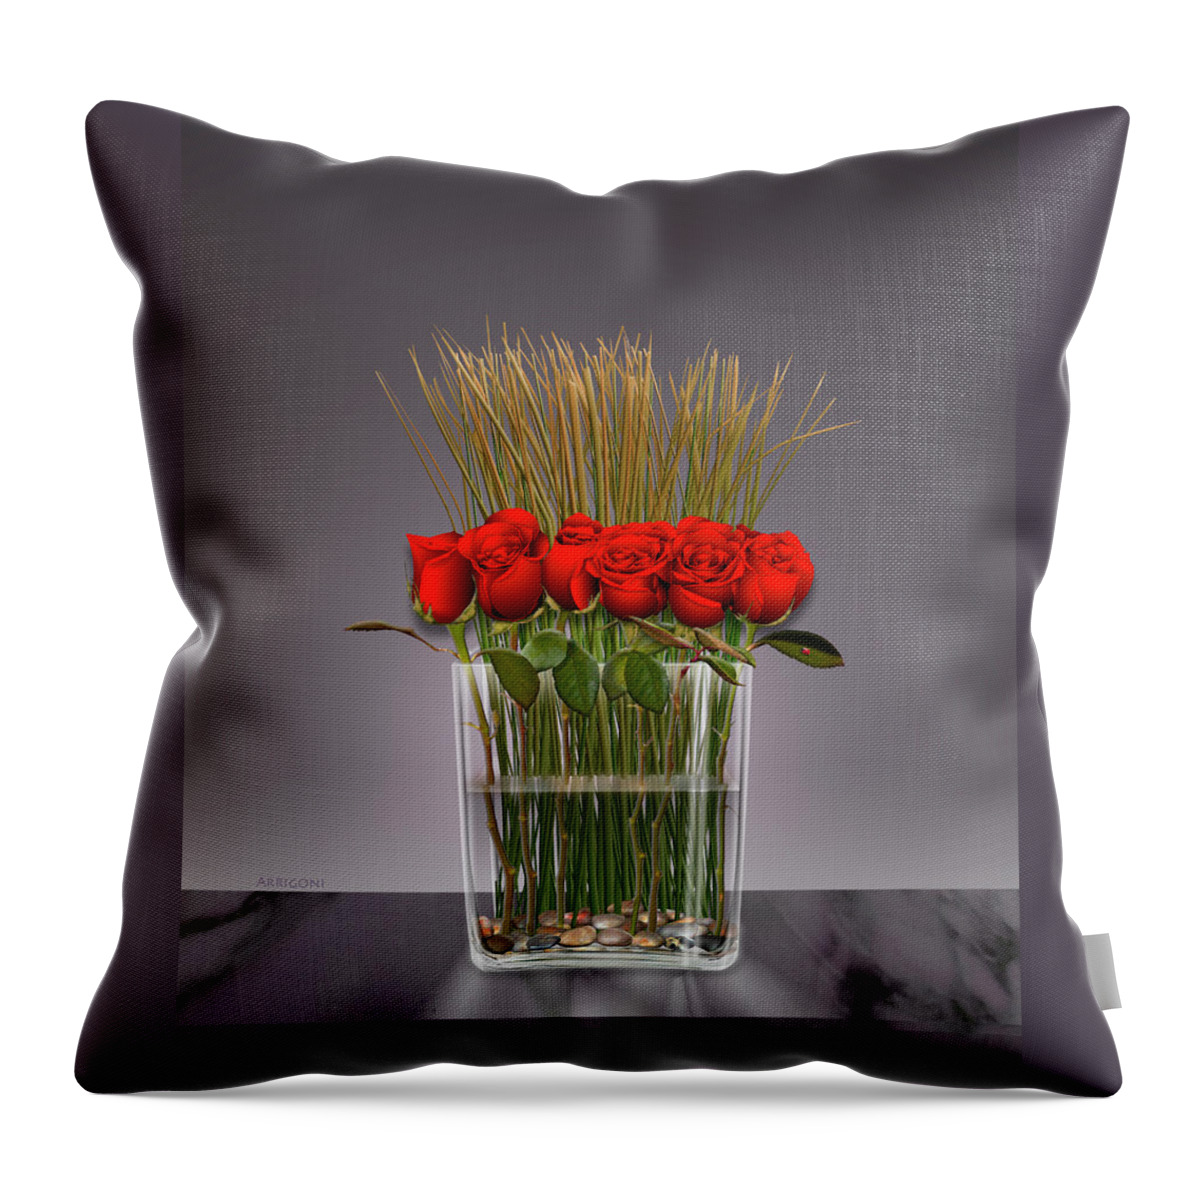 Red Roses Throw Pillow featuring the painting Red Roses in Vase by David Arrigoni